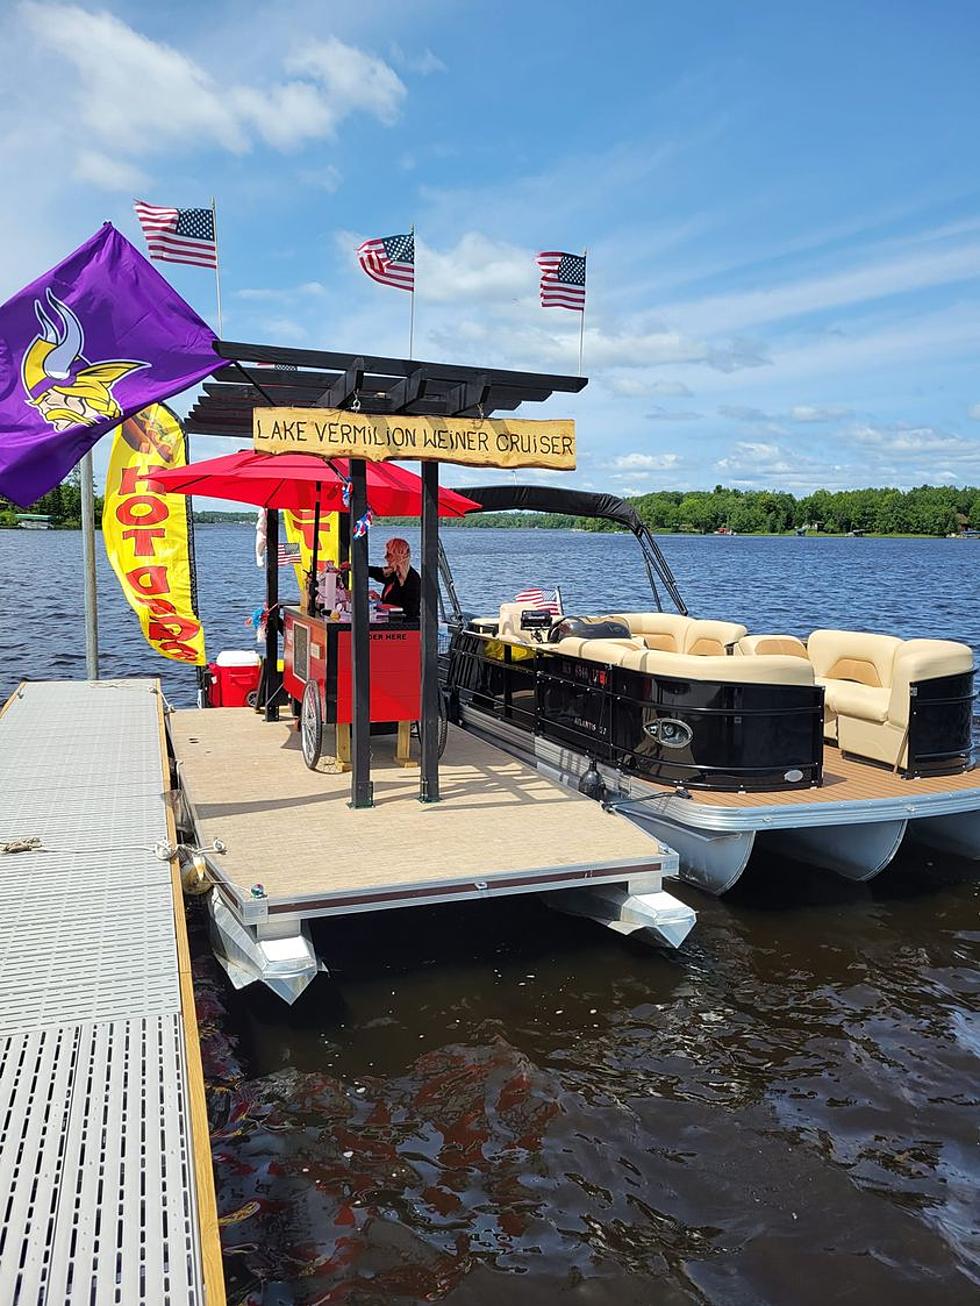 Crazy Genius or Just Crazy? Hot Dog Stand on a Lake in N. Minnesota